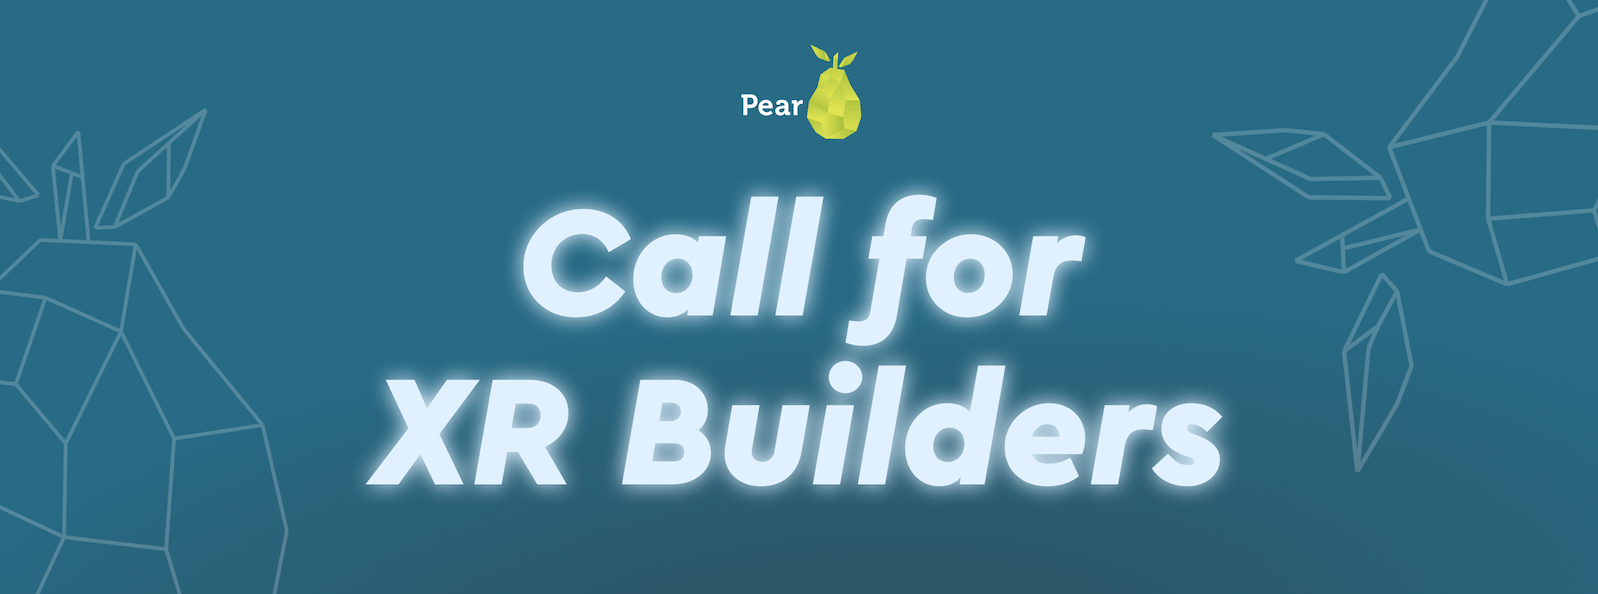 resources AR/VR/XR/PEAR: our call for mixed reality builders 